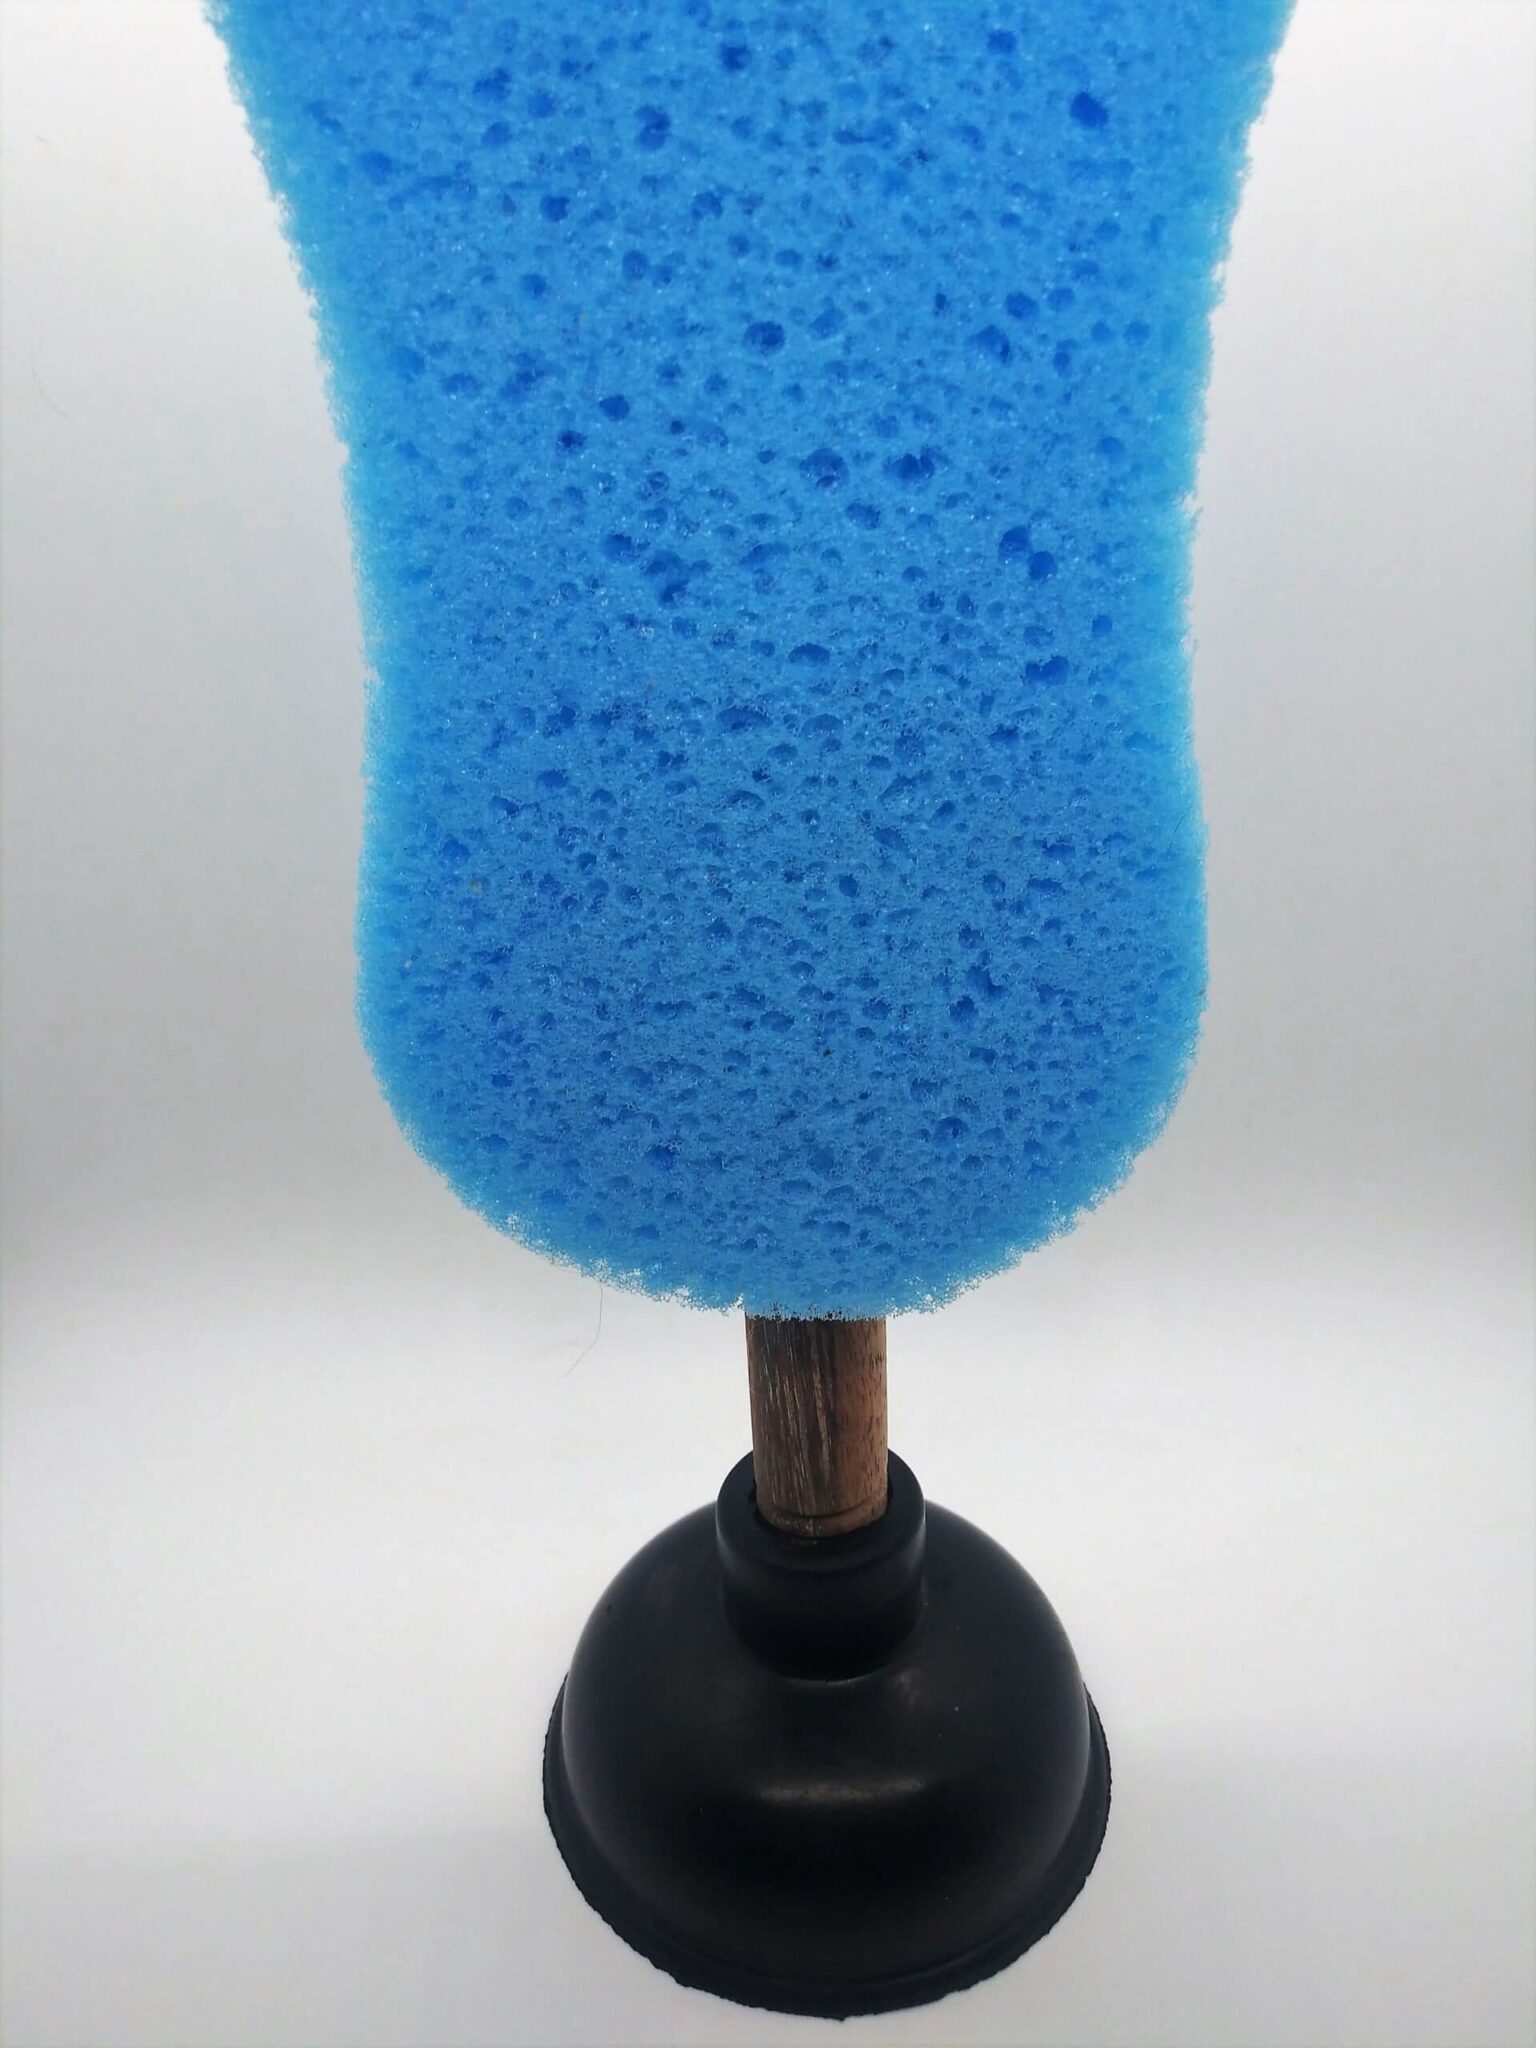 DIY anal sex toys, plunger toy. Photo of a blue sponge covering the handle of a sink plunger.